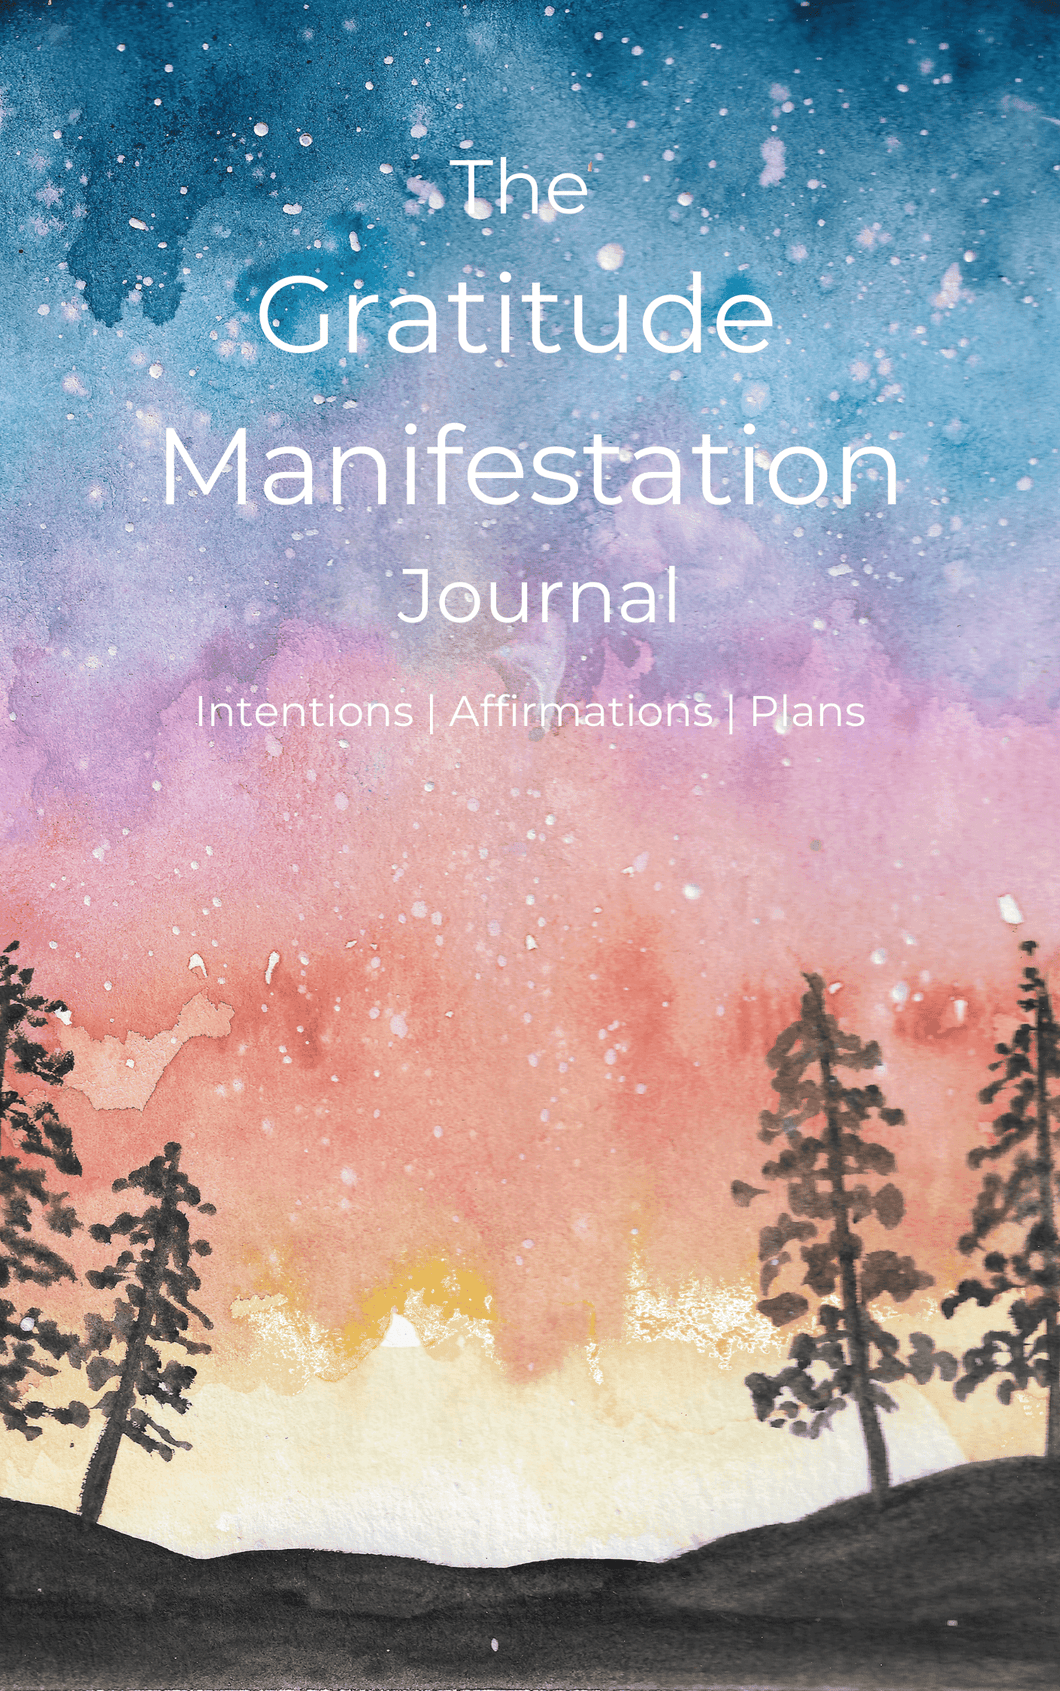 The Gratitude Manifestation JournalIntentions, Affirmations, Plans-Self Exploration Journal for Finding Healing, Purpose with a Guided Message from the Universe.